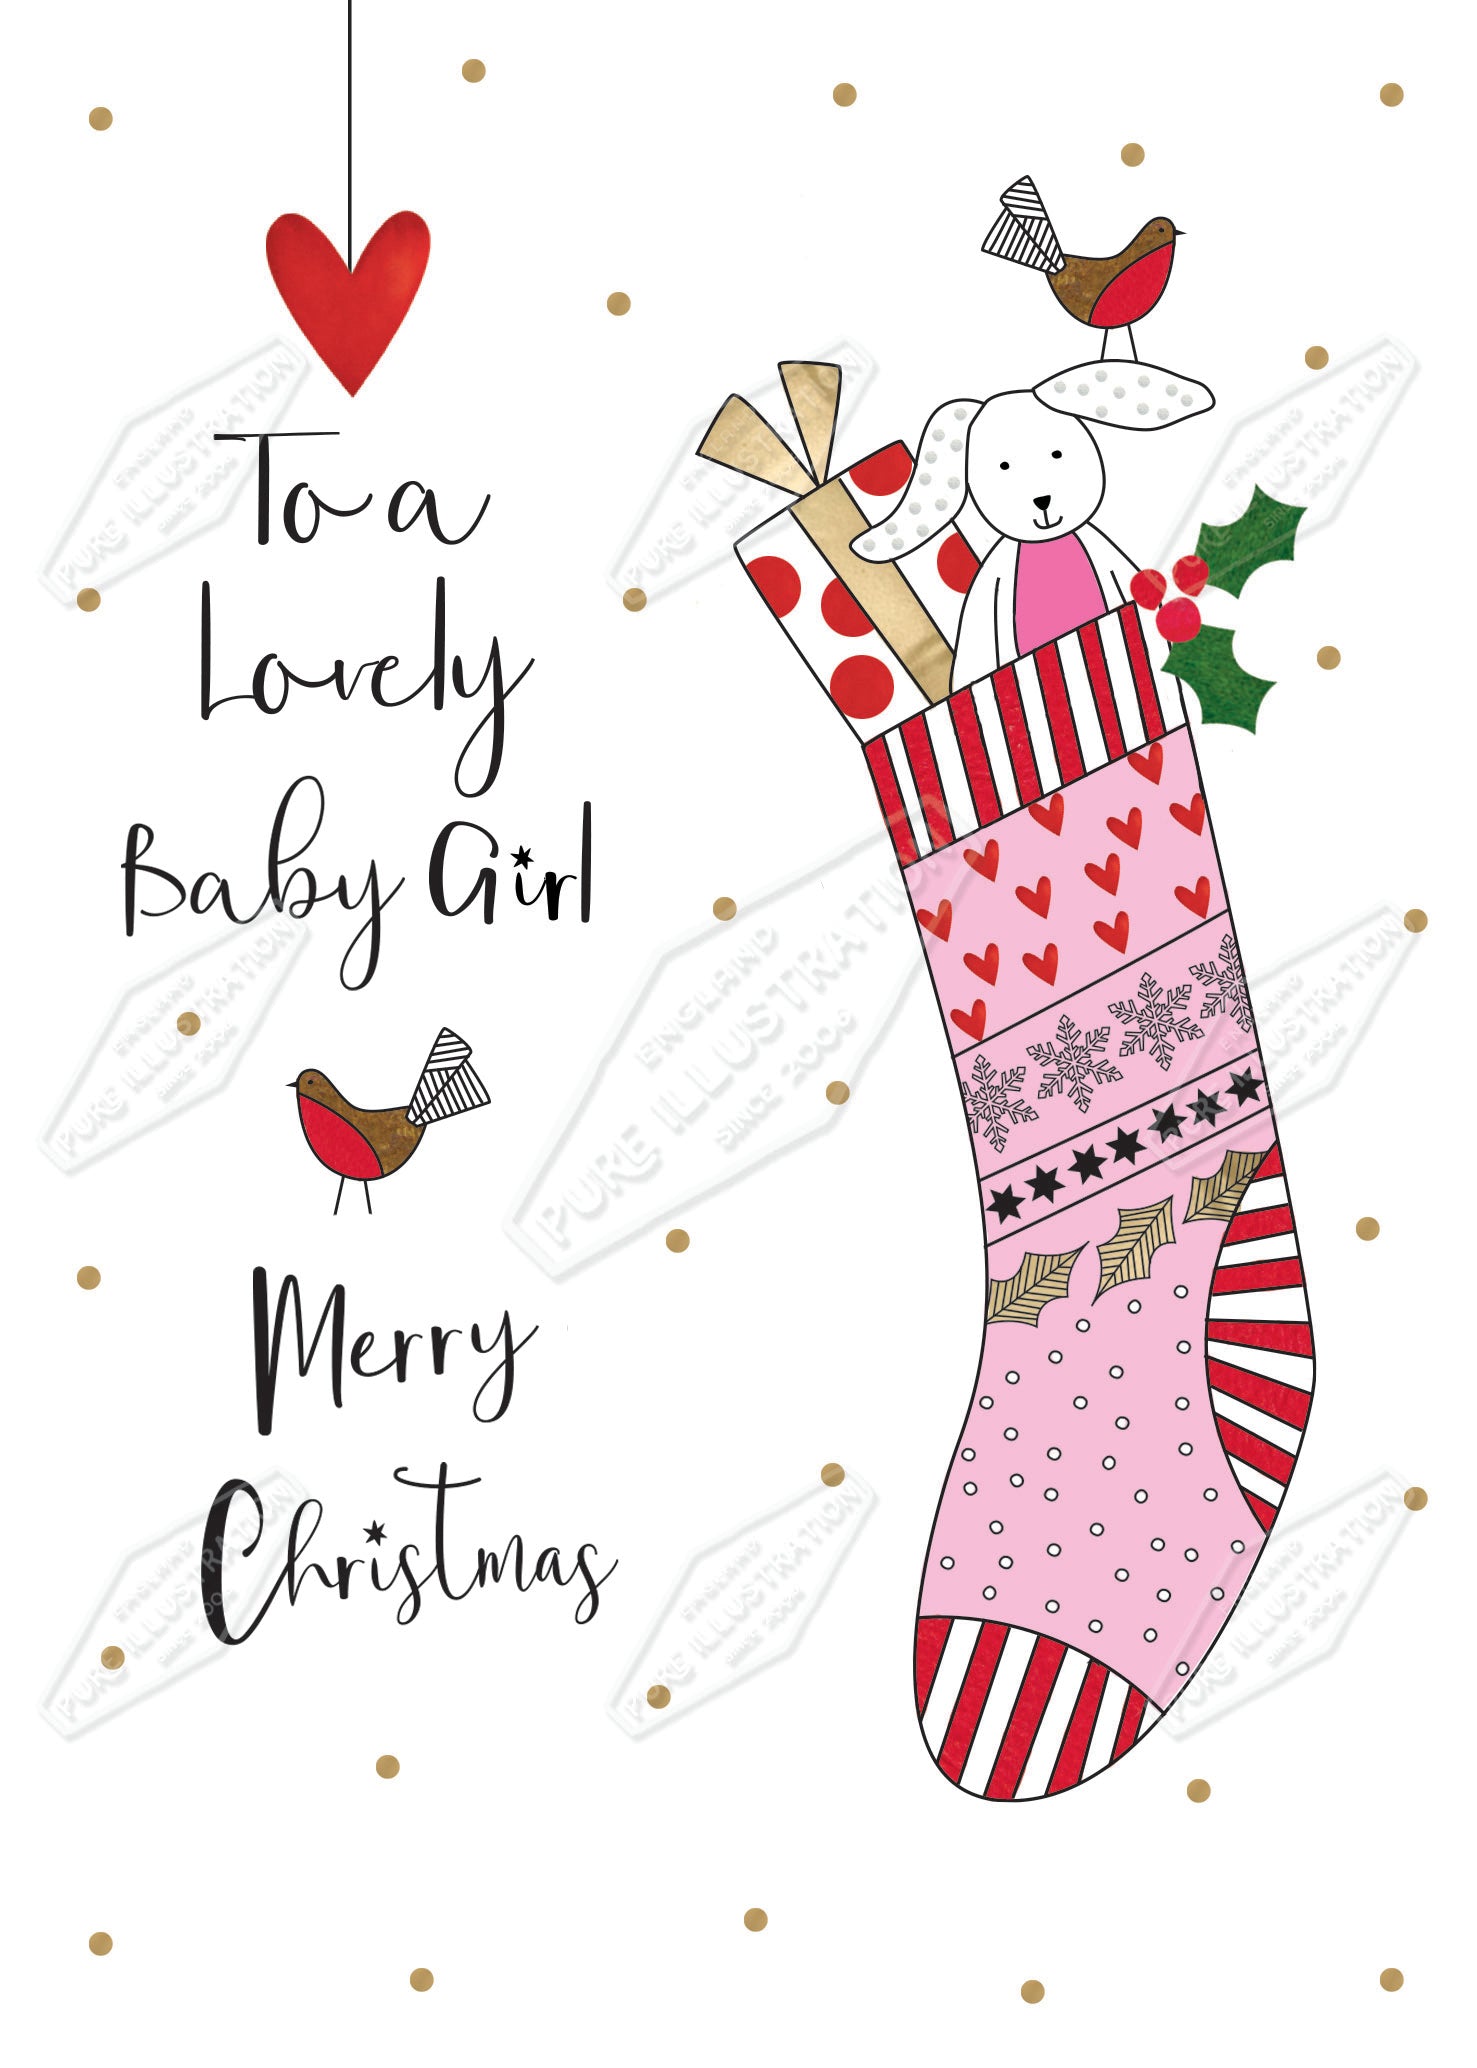 00035423IMC- Isla McDonald is represented by Pure Art Licensing Agency - Christmas Greeting Card Design